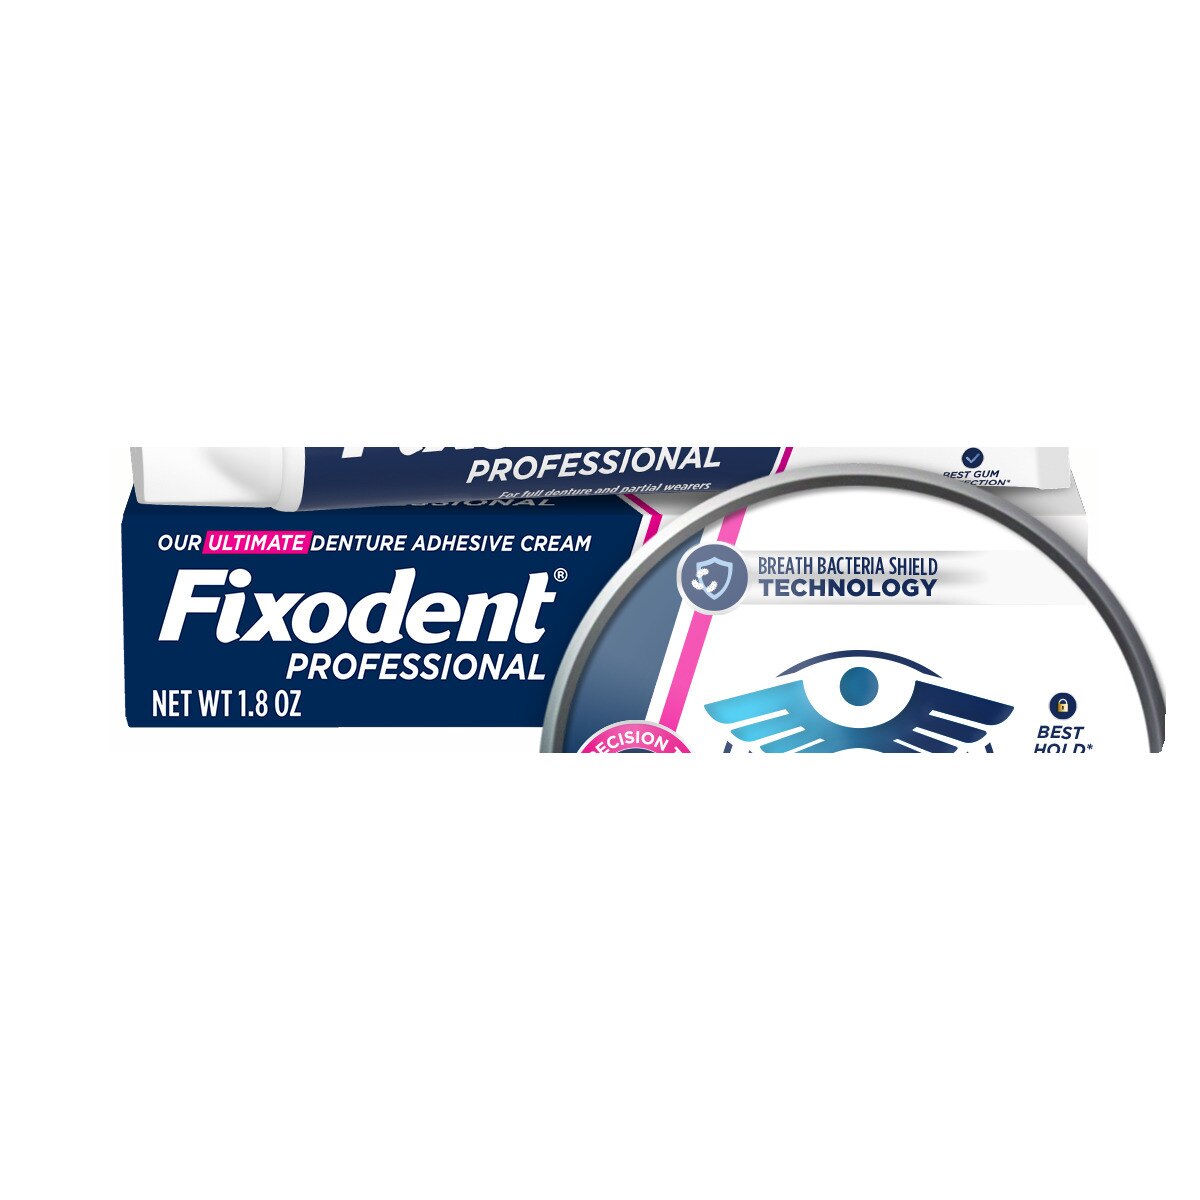 Fixodent Professional Ultimate Denture Adhesive Cream for Full and Partial Dentures, with Breath Bacteria Shield Technology